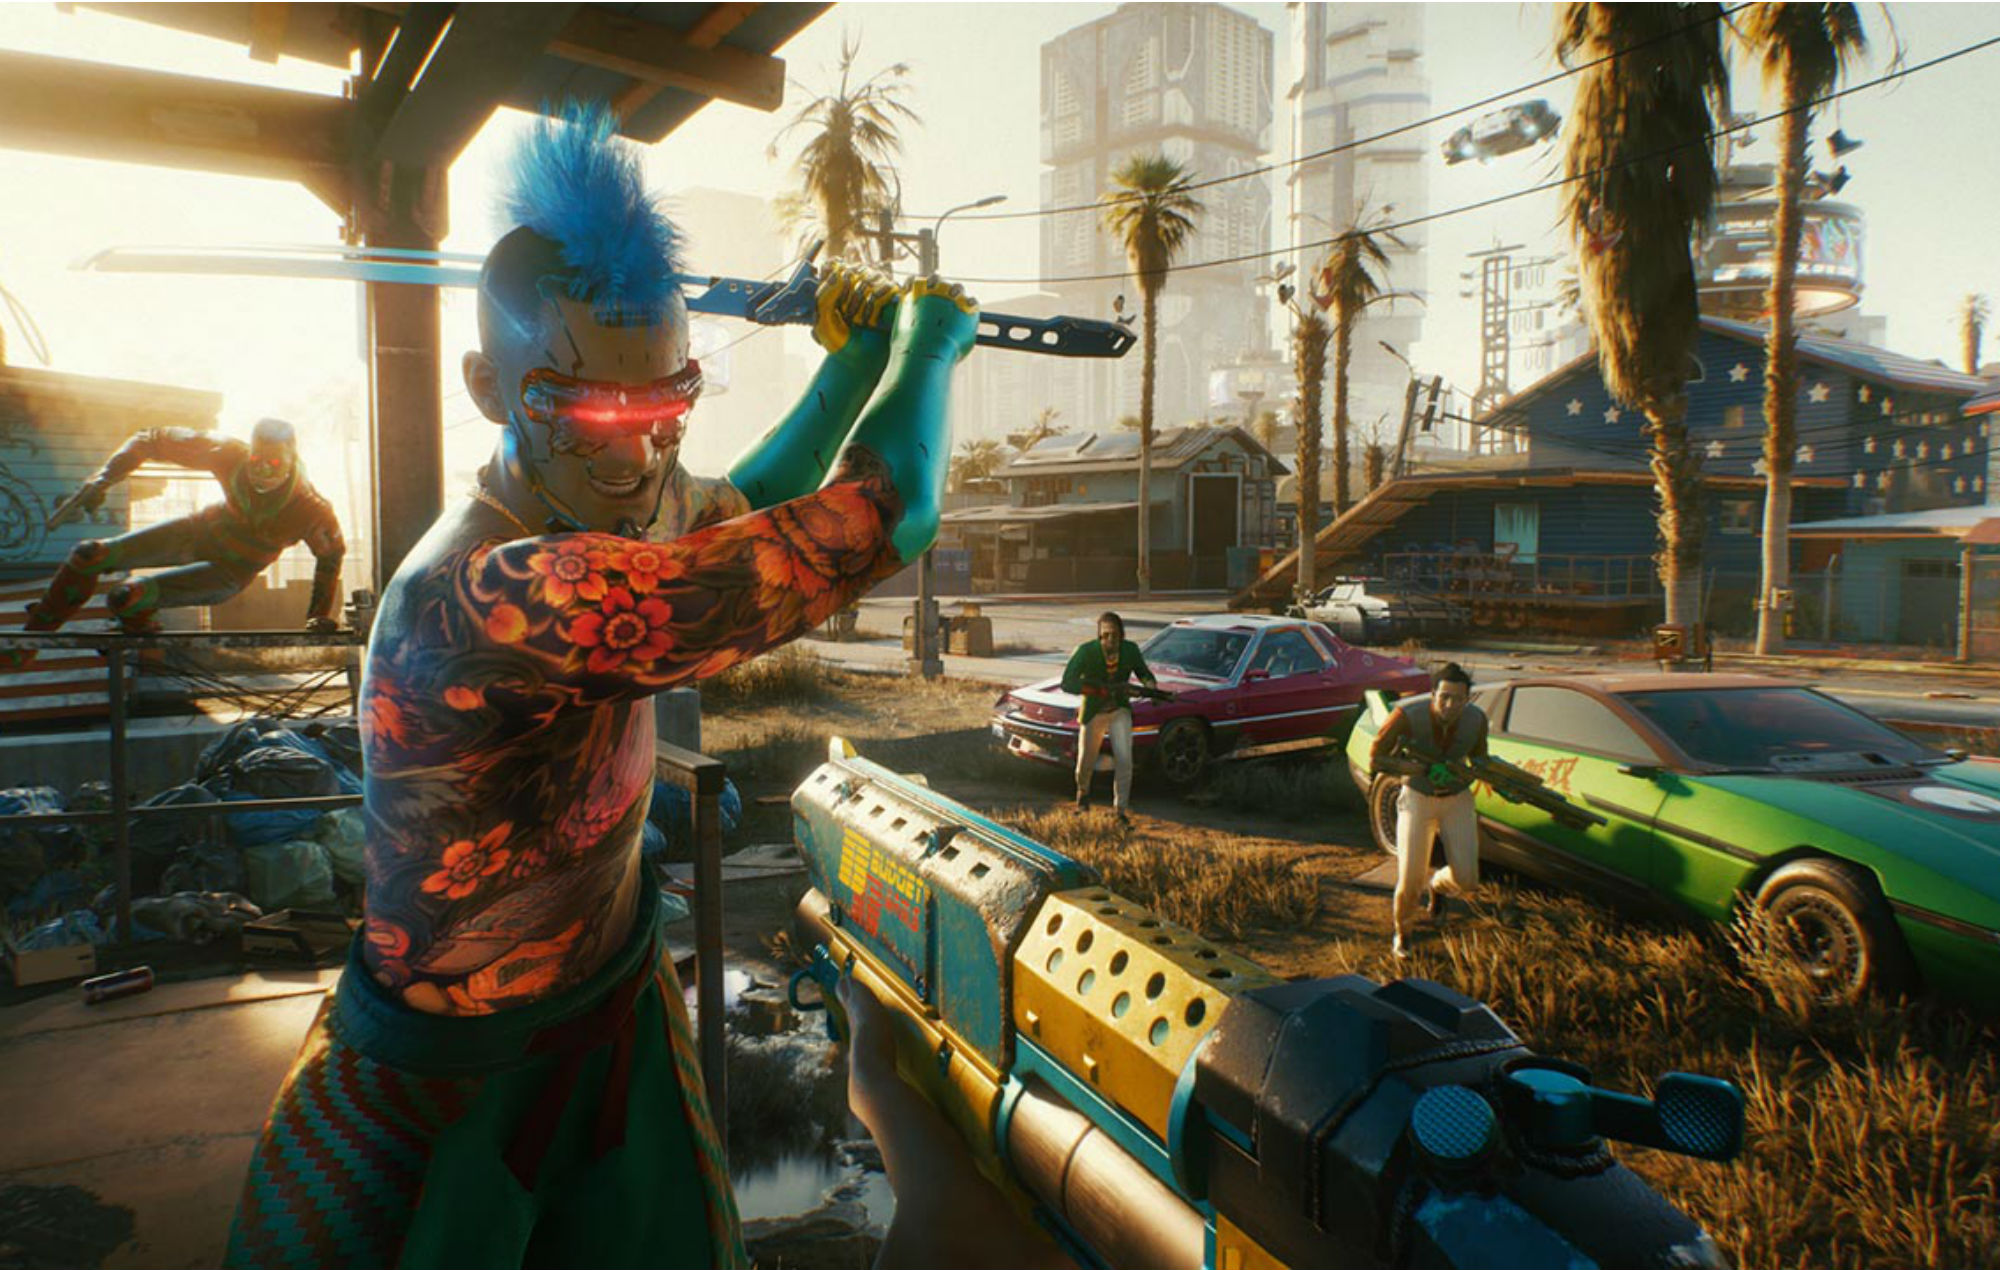 Cyberpunk 2077 loses 79 percent of its player base in one month

